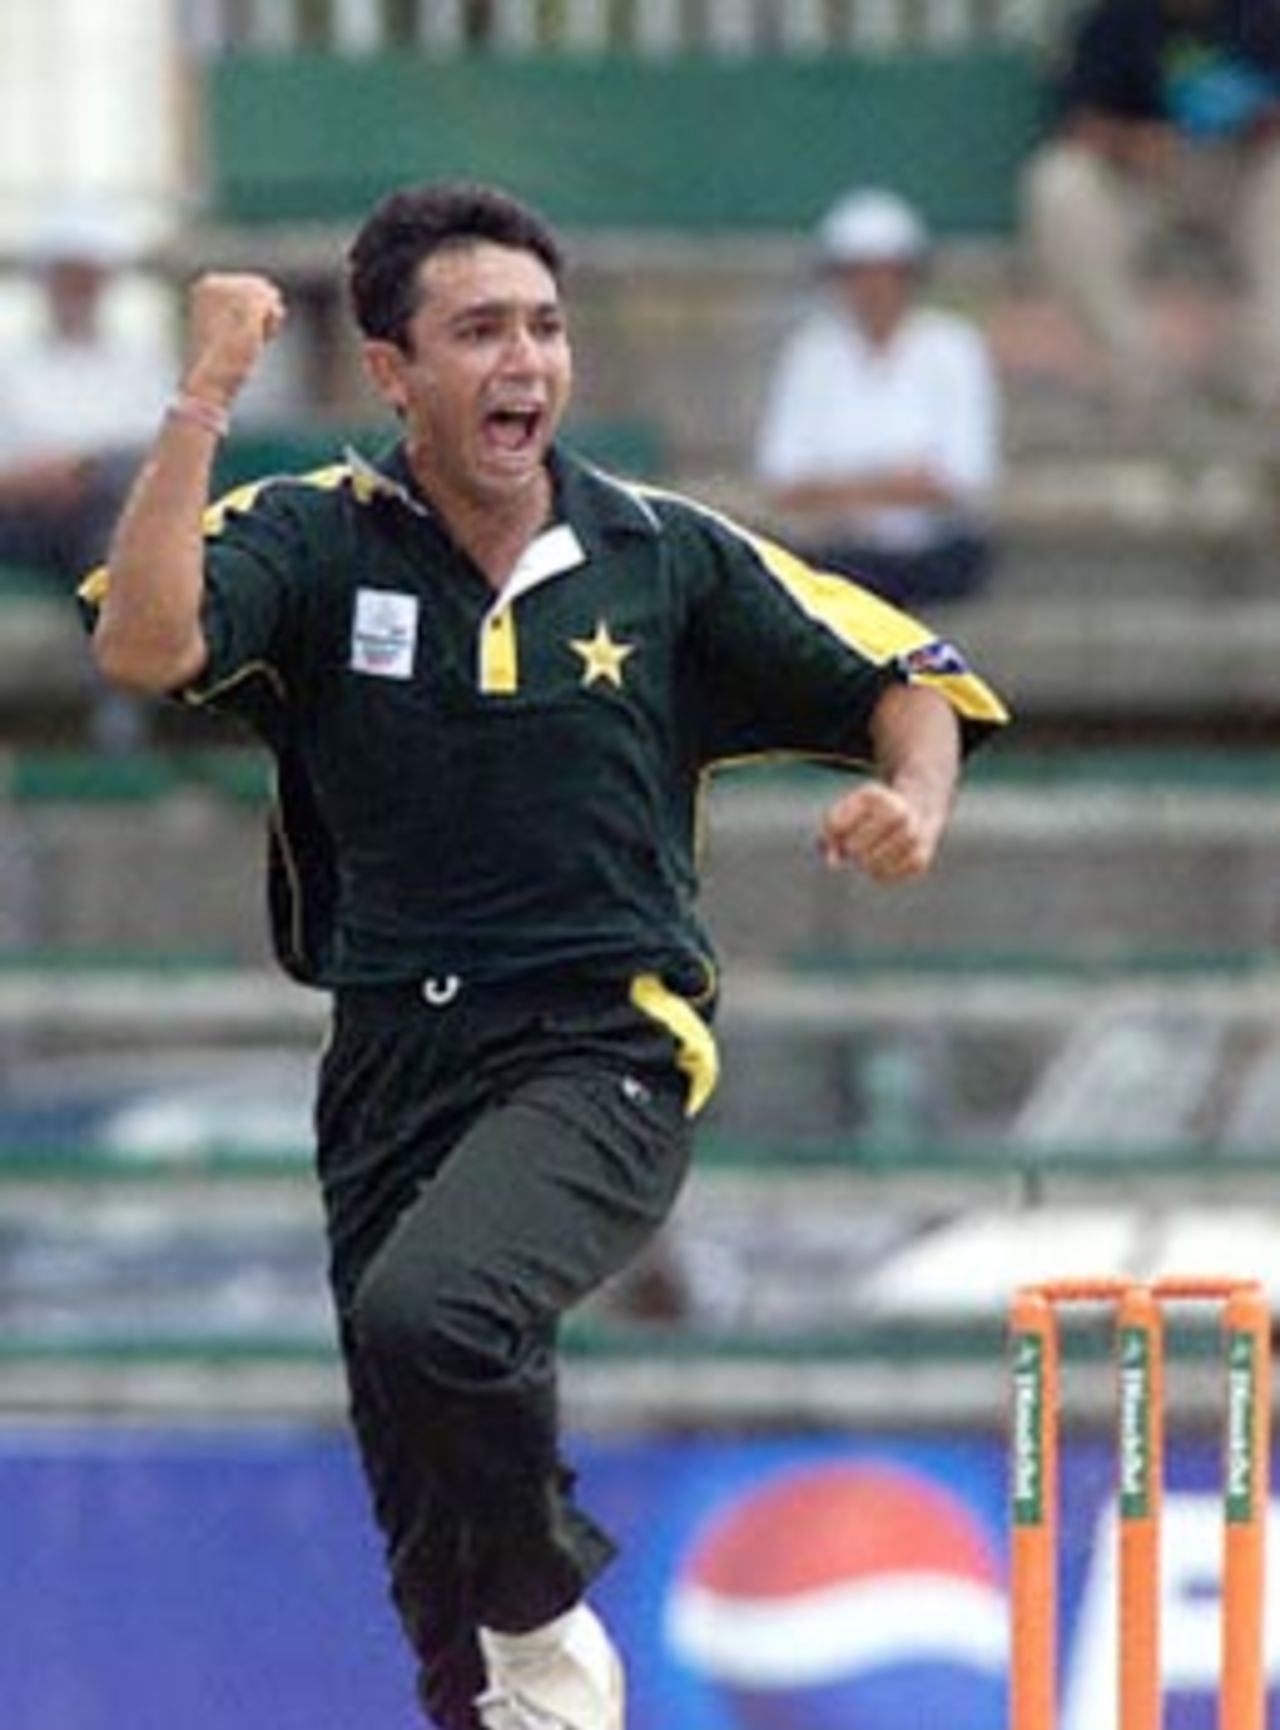 Azhar Mahmood pumps his fist after picking up the wicket of Fleming. ICC KnockOut 2000/01, 1st Semi Final, New Zealand v Pakistan, Gymkhana Club Ground, Nairobi, 11 October 2000